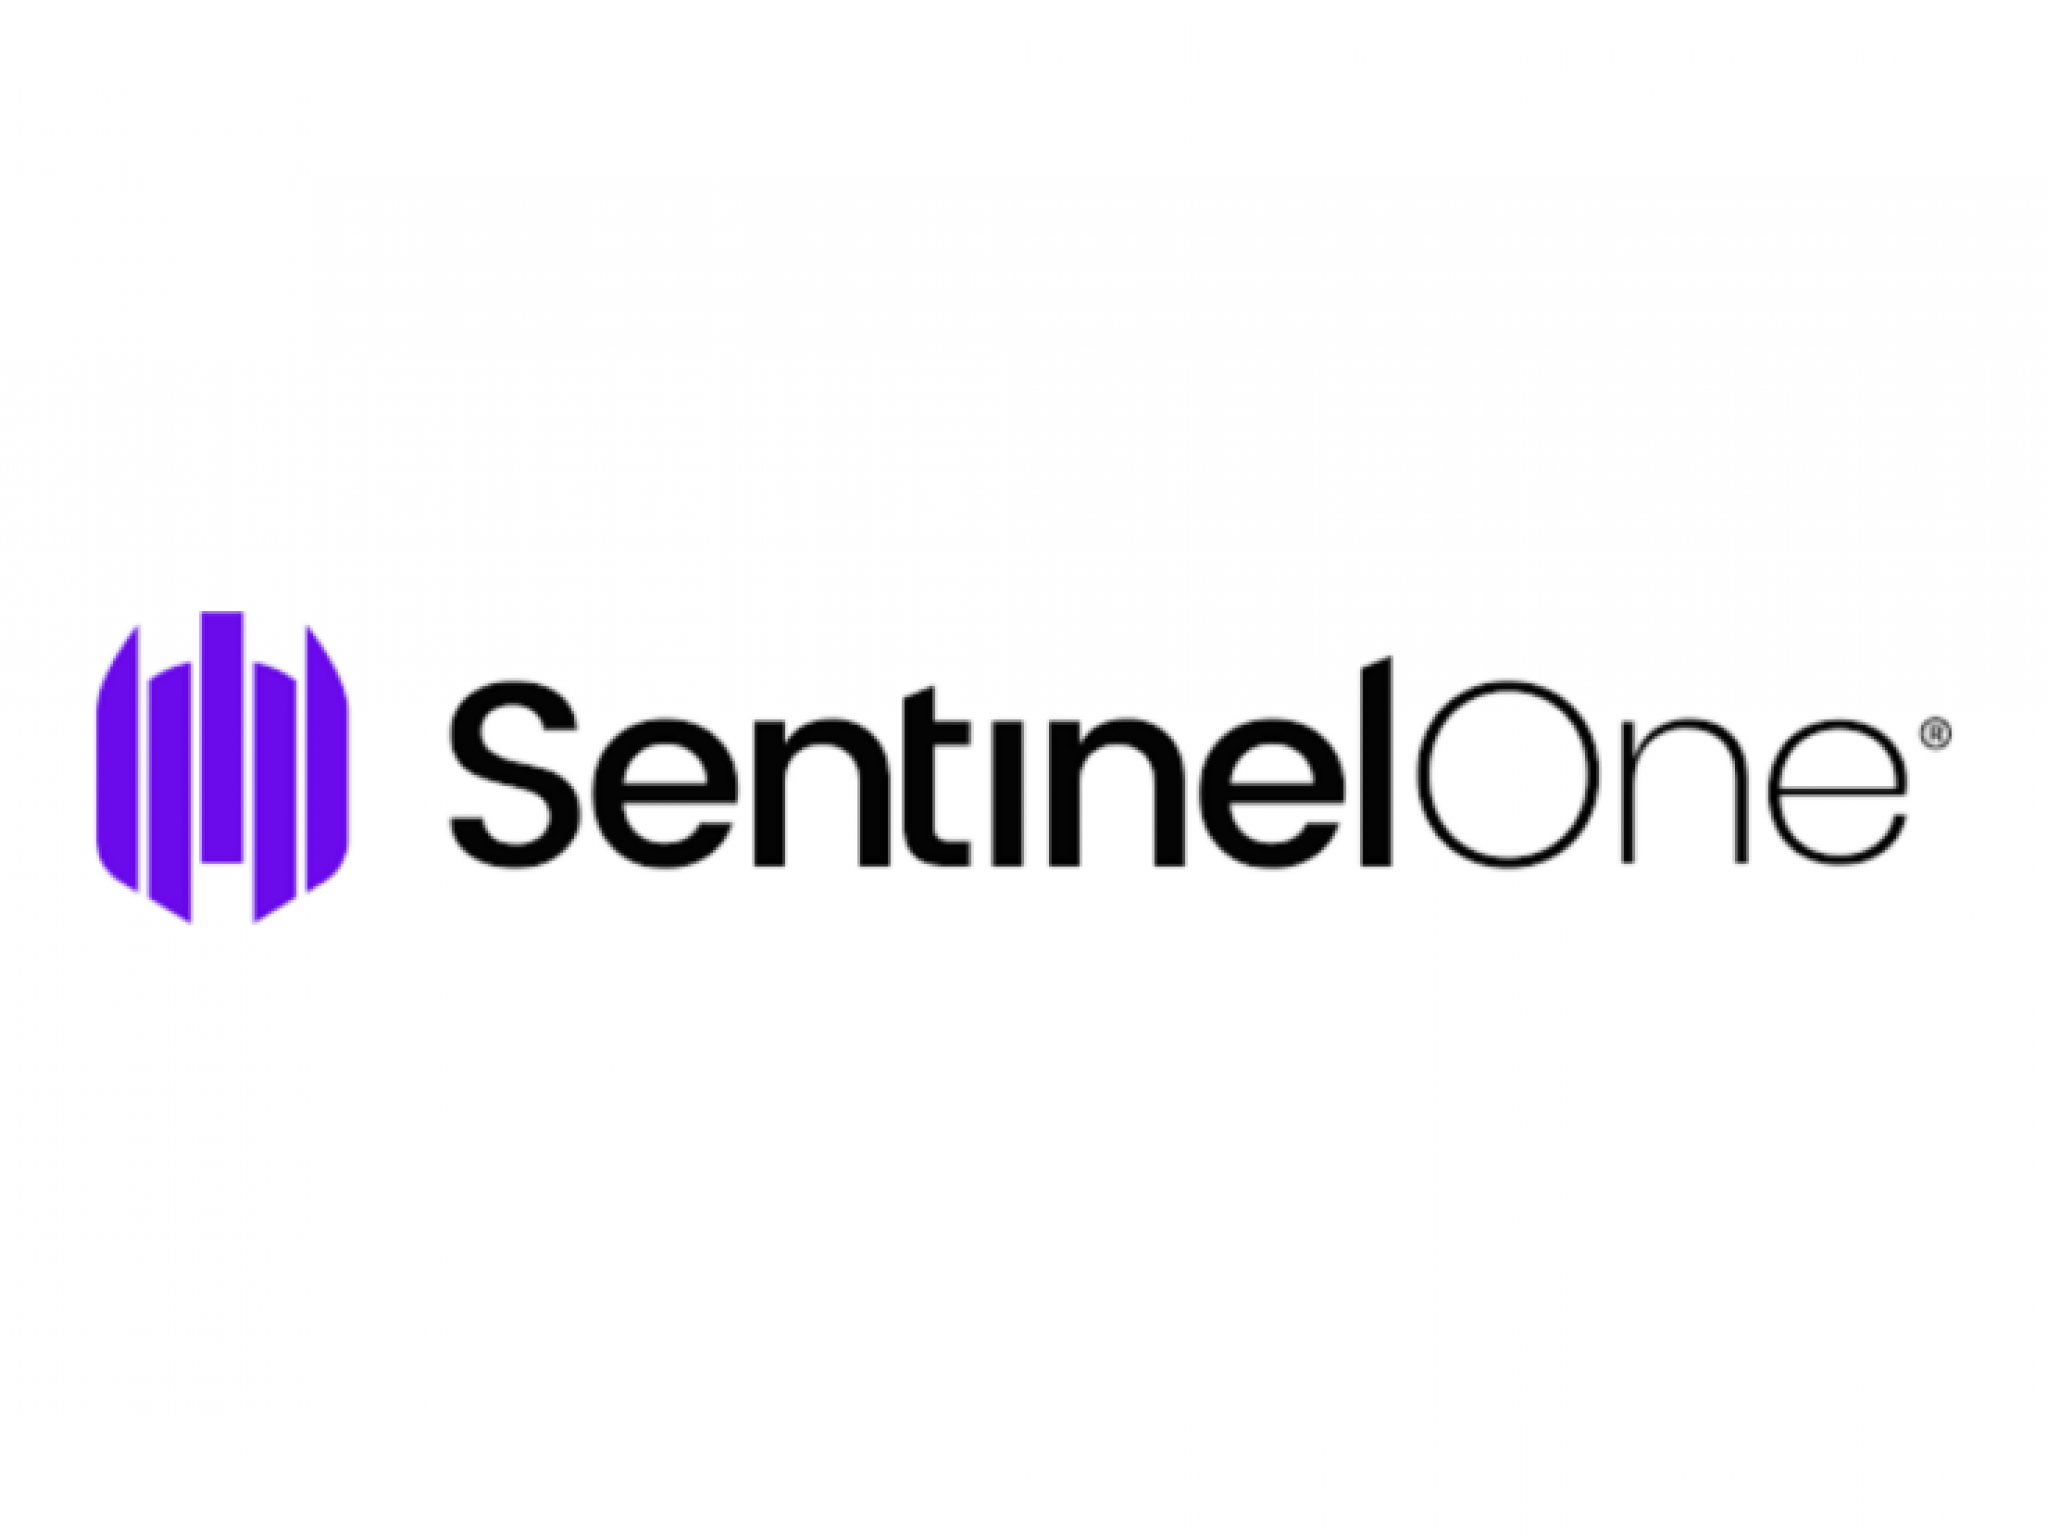  sentinelone-analysts-flag-its-ai-driven-security-and-market-growth-potential-as-key-catalysts-for-optimism 